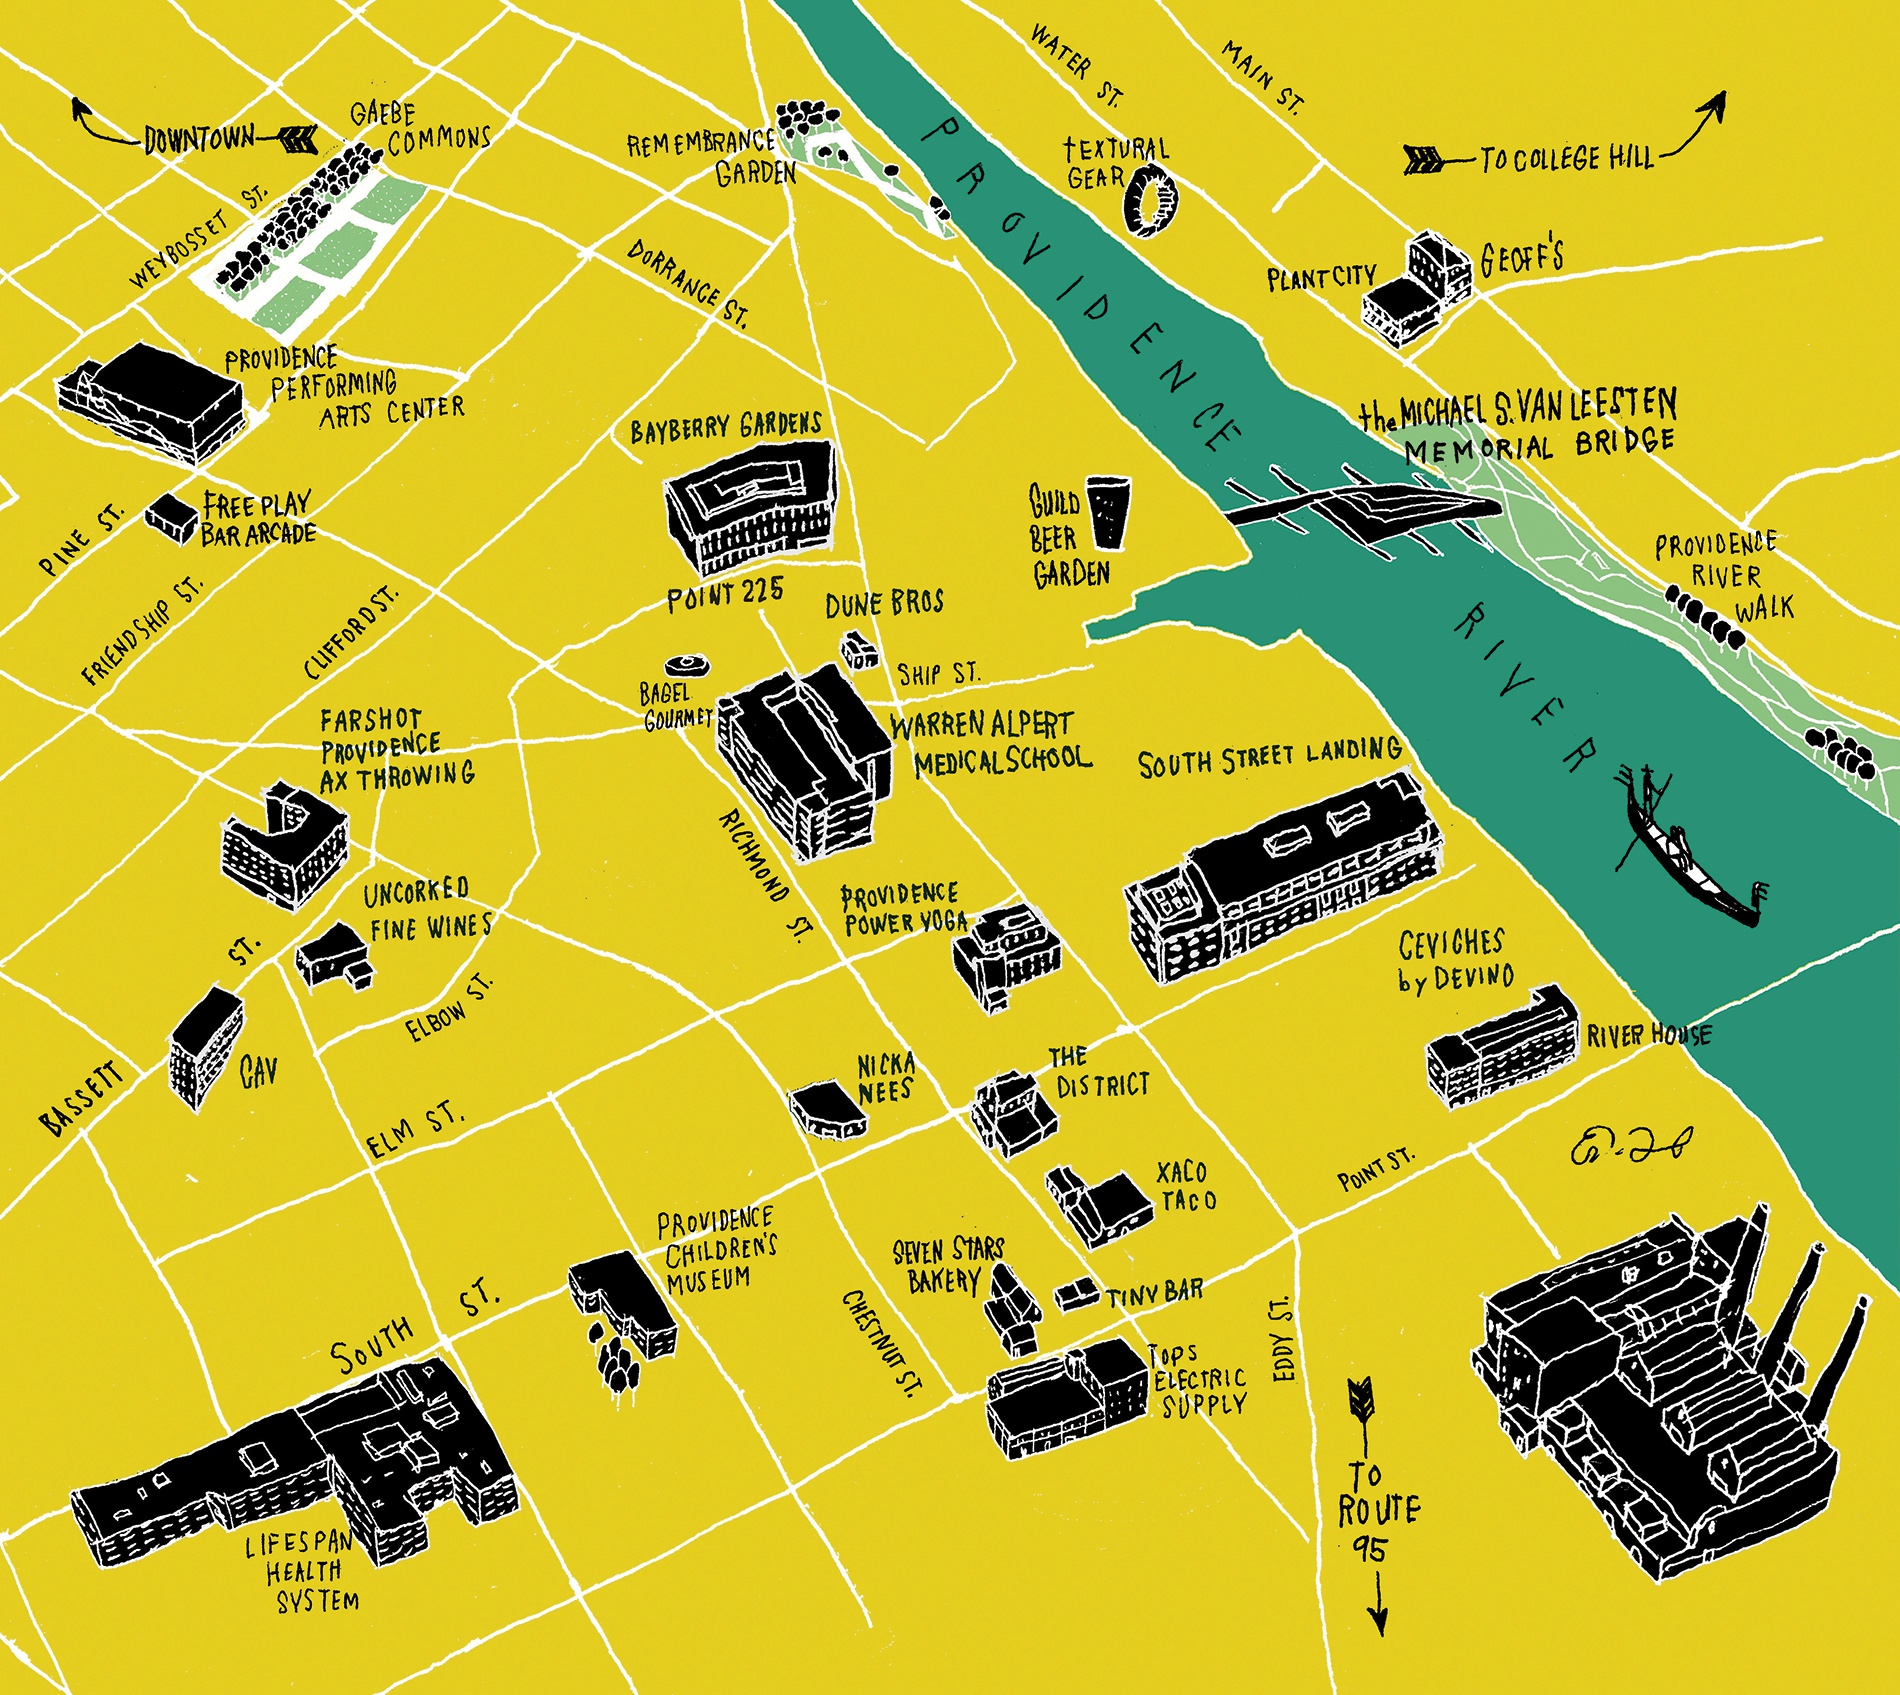 Illustrated map of the Jewelry District